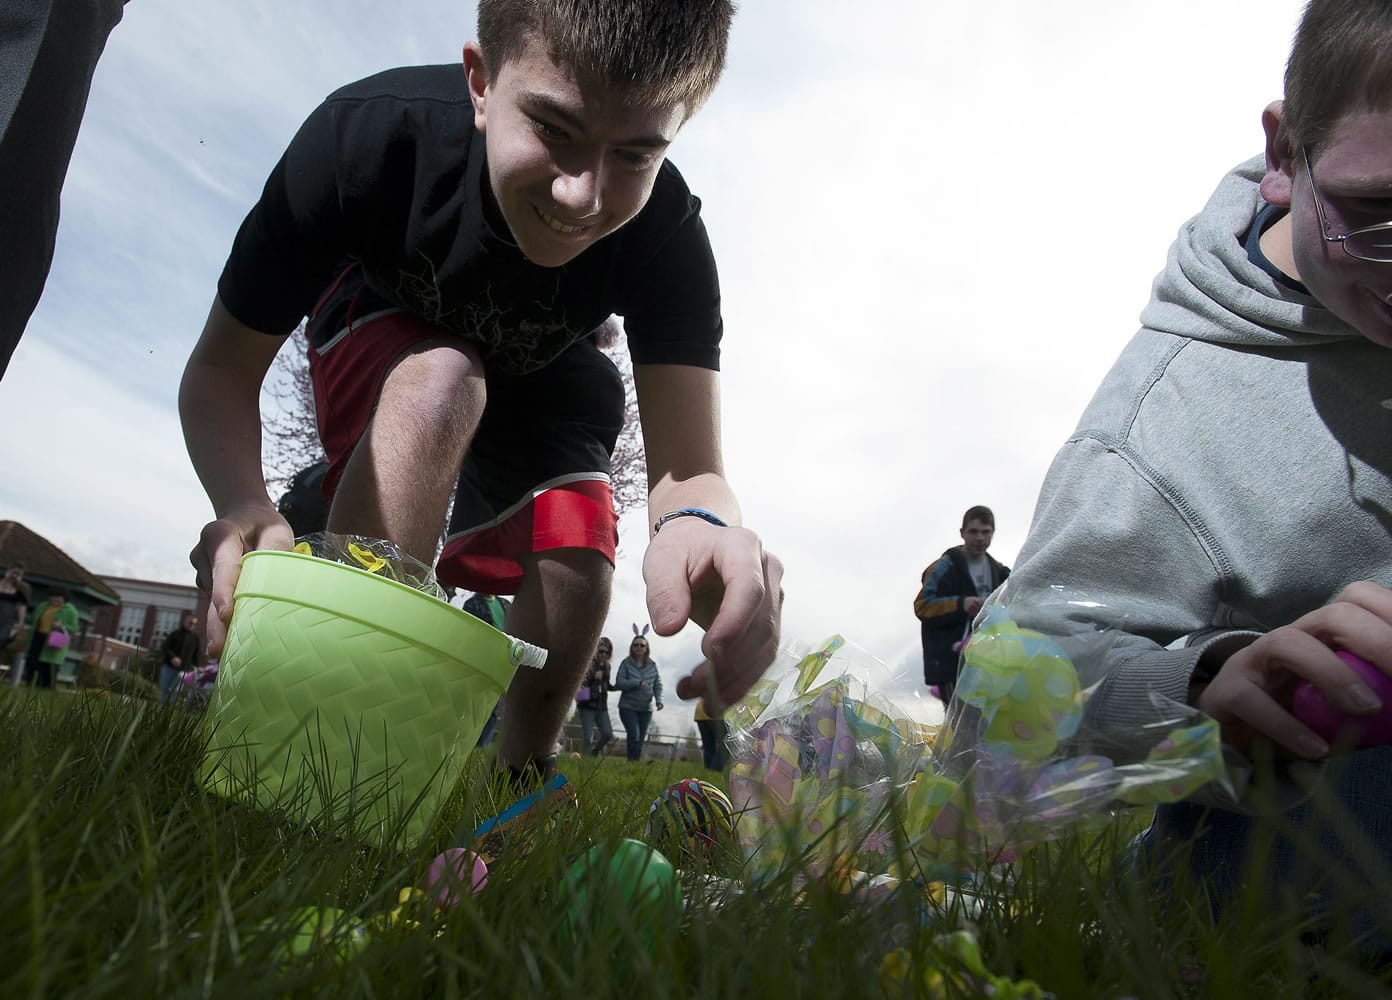 Washington State School for the Blind students (from left) Tanner Deck, 14, and Gabe Markstrom, 17, grab candy during the annual Easter egg hunt.